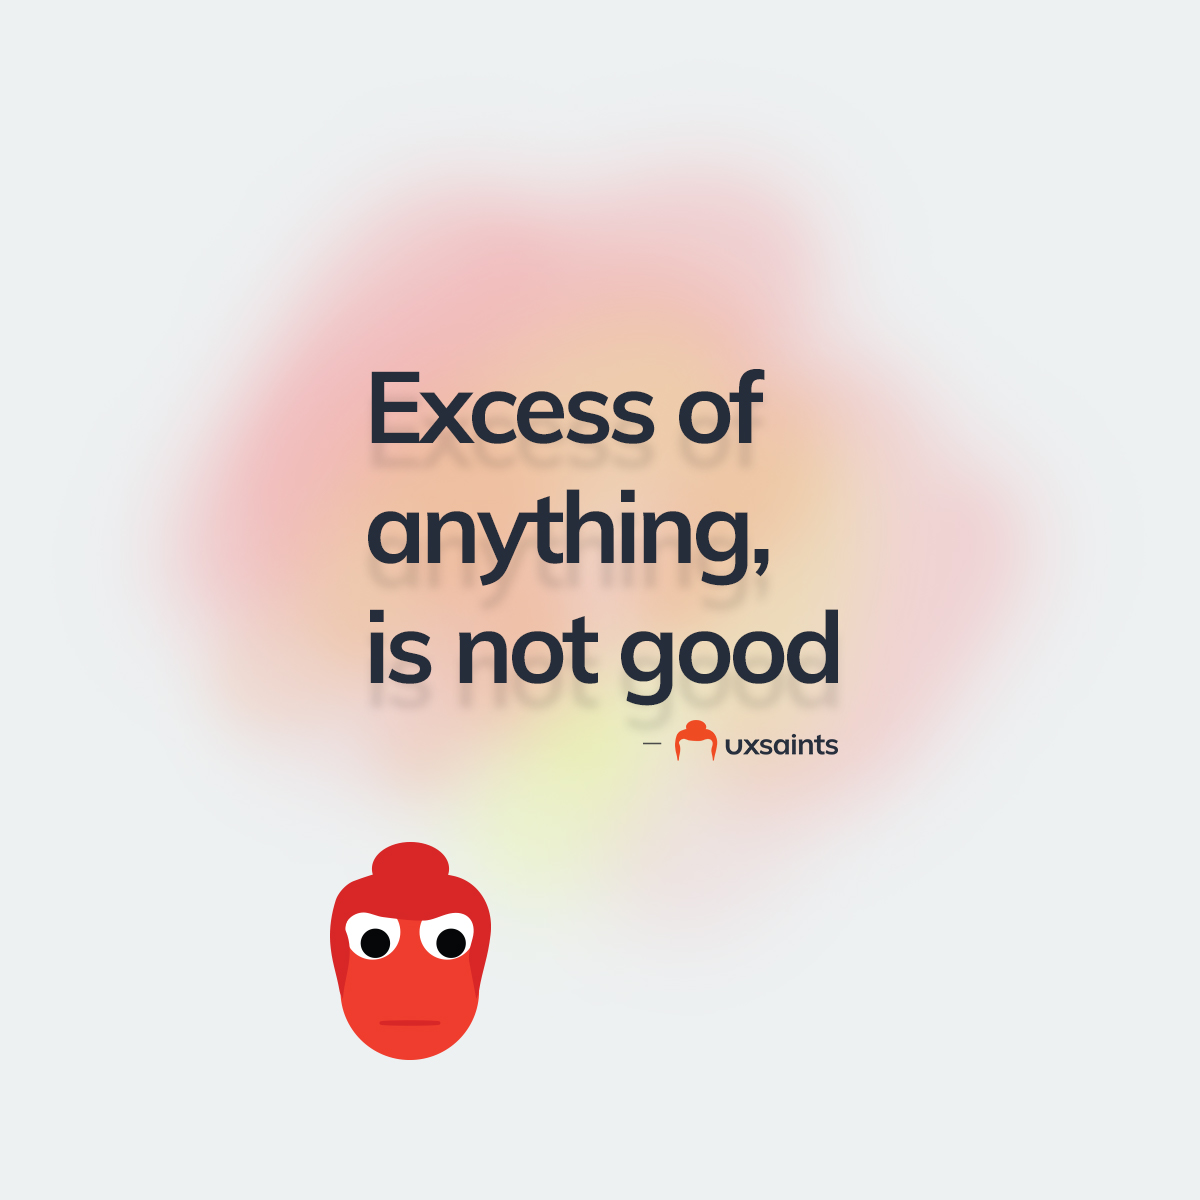 Excess of anything is not good